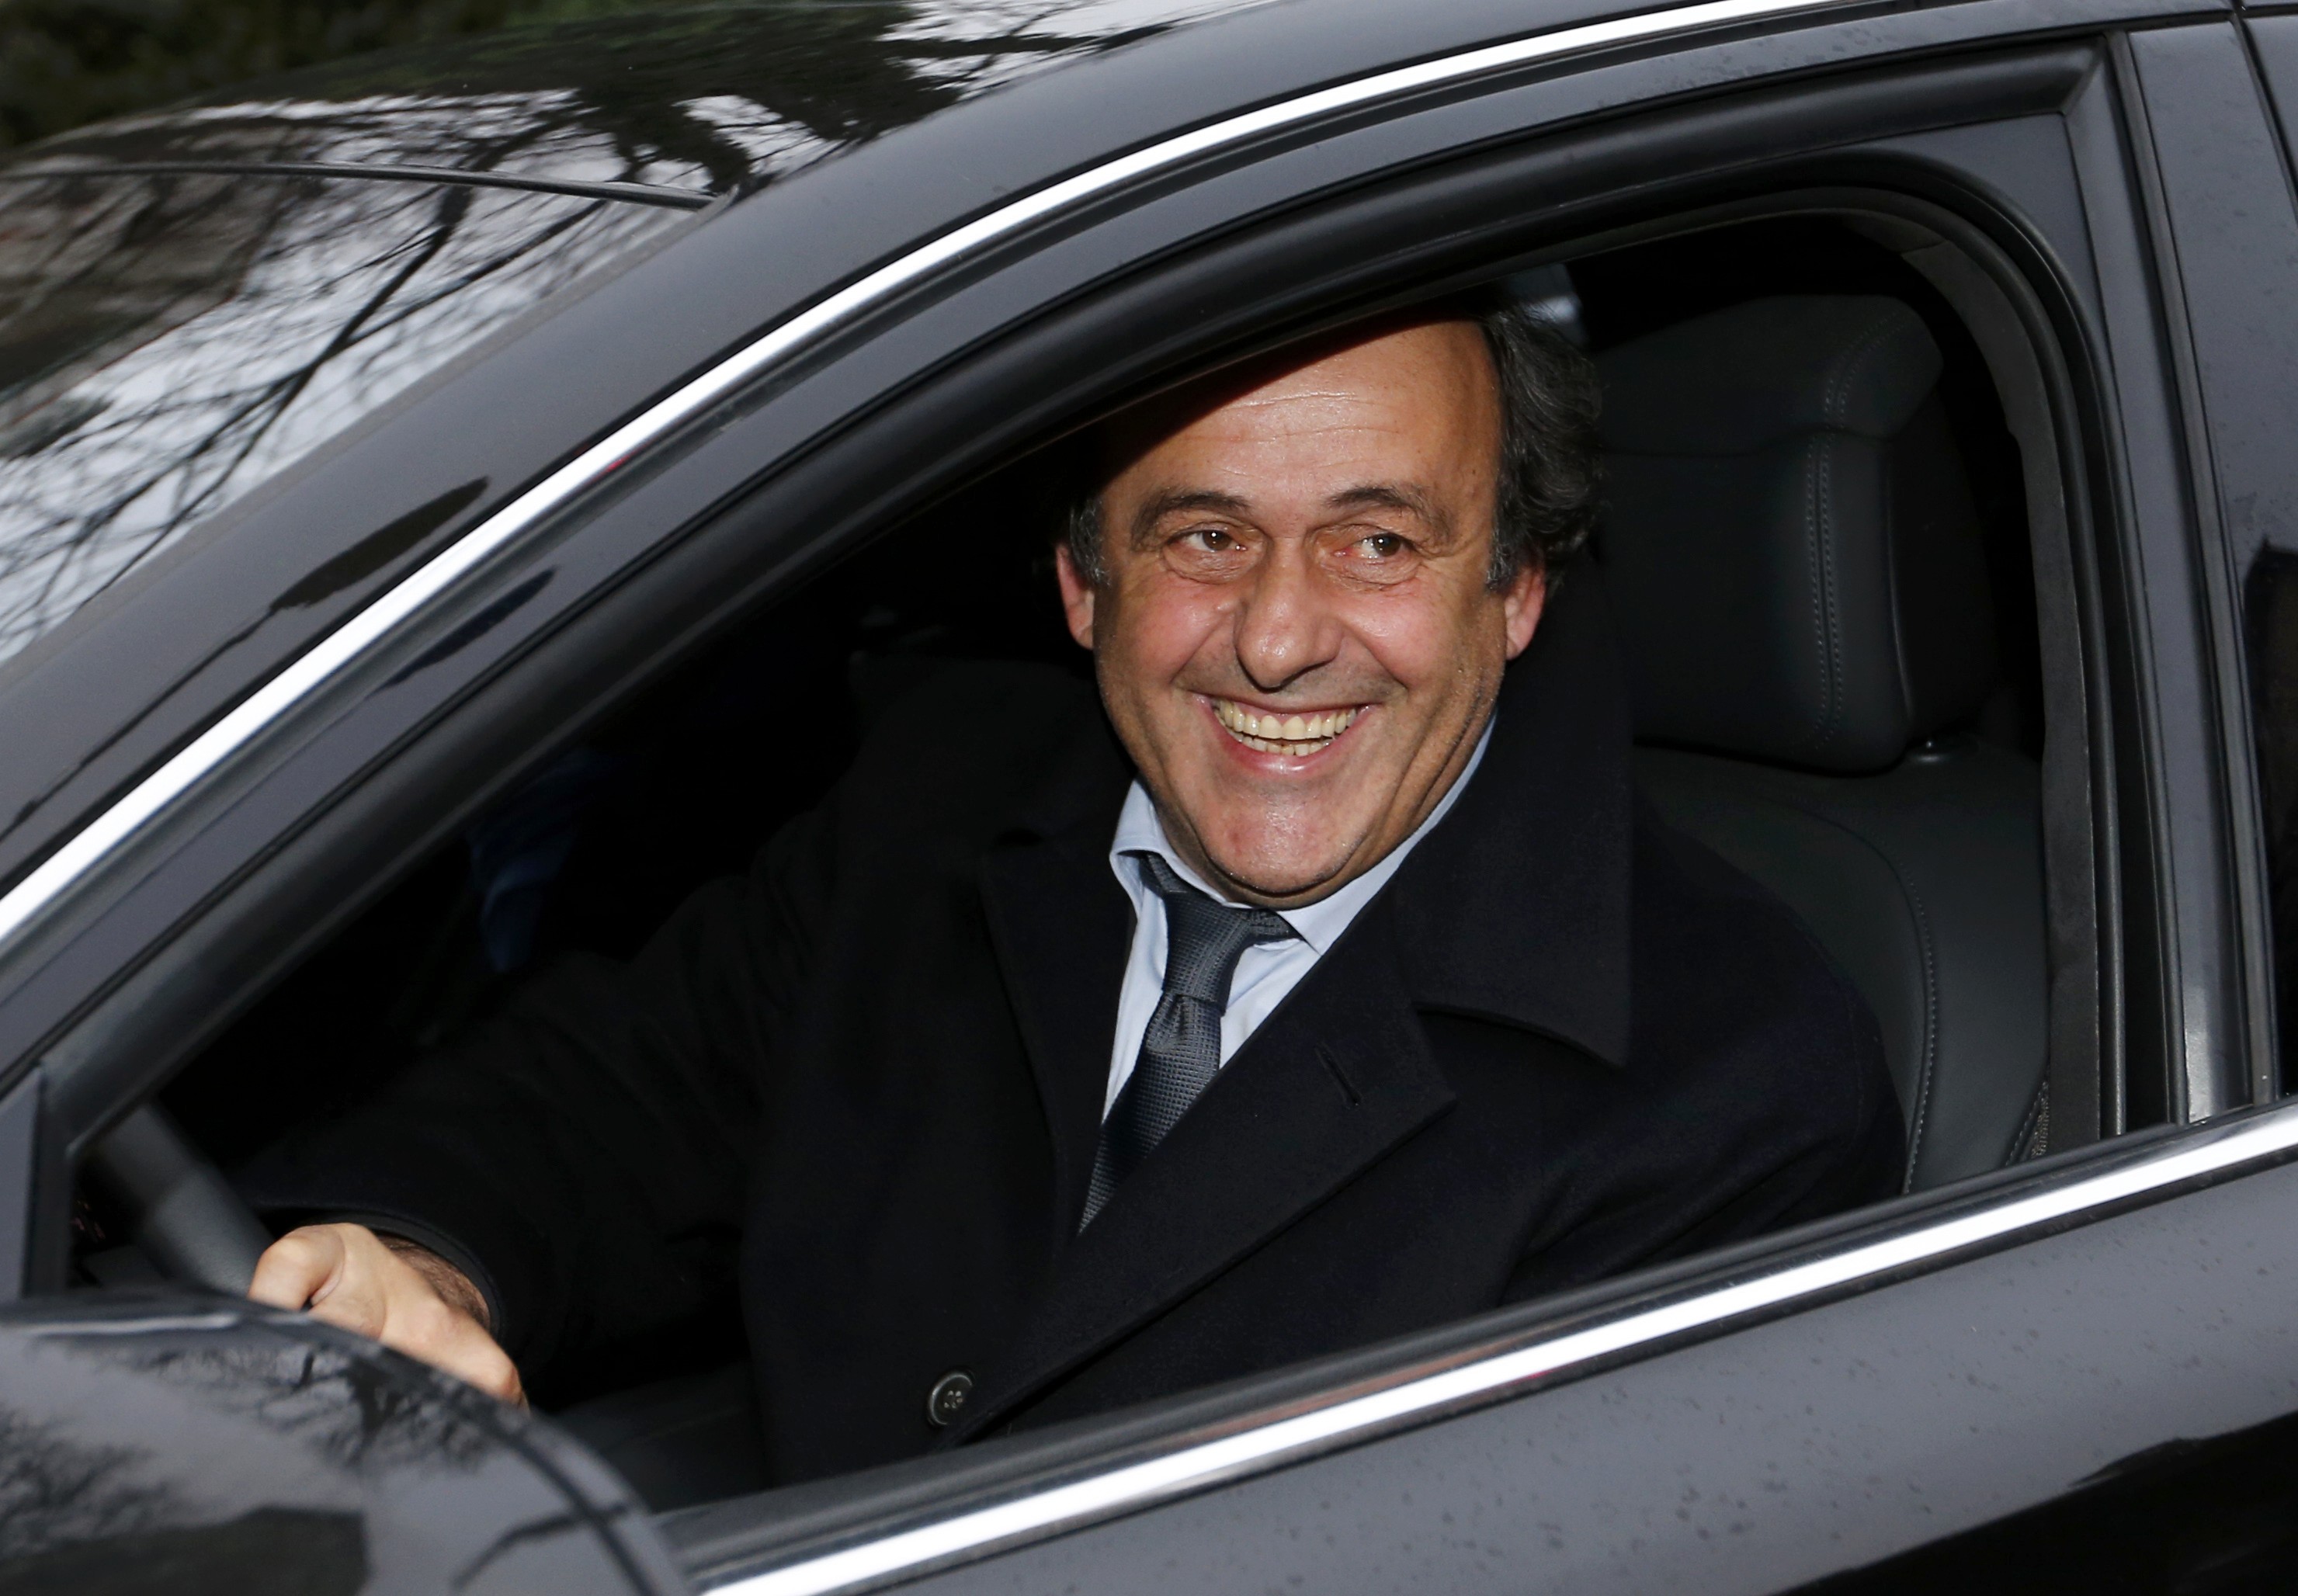 UEFA President Michel Platini leaves after a hearing at the Court of Arbitration for Sport (CAS) in Lausanne, Switzerland December 8, 2015. Photo: Reuters